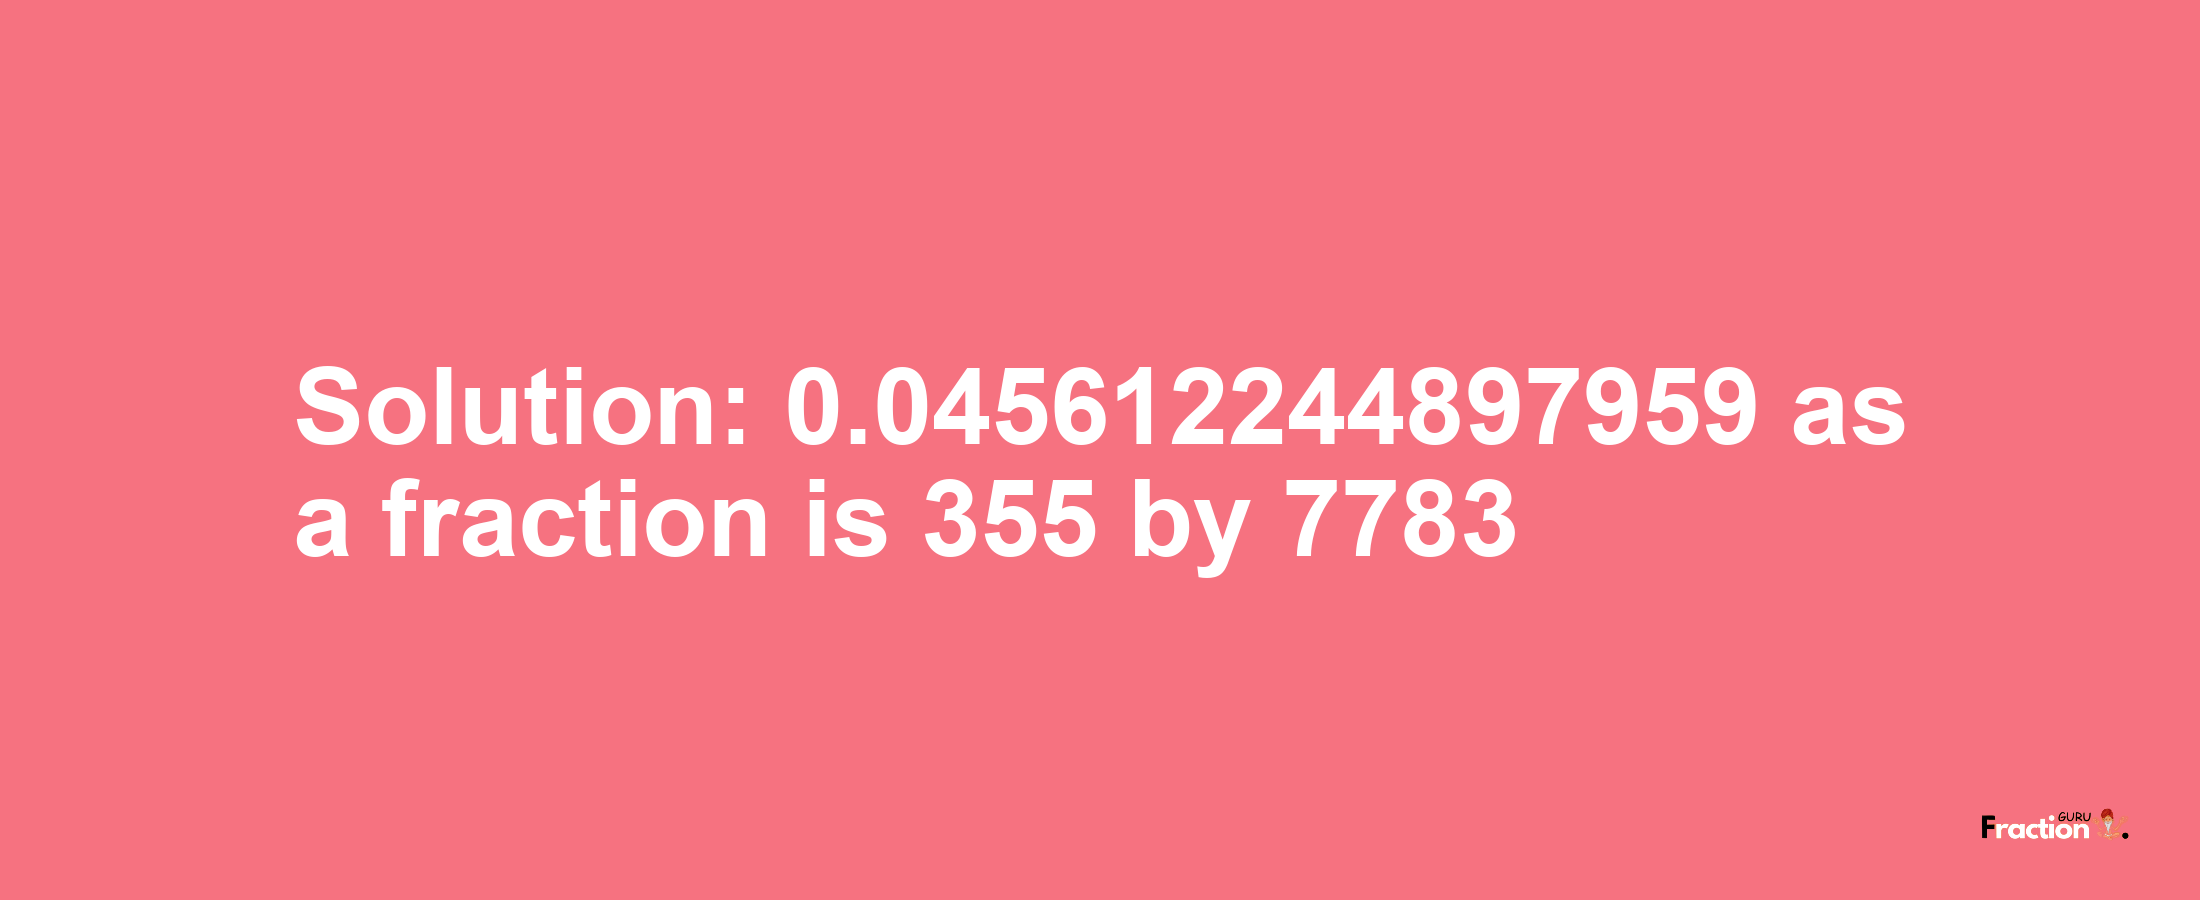 Solution:0.045612244897959 as a fraction is 355/7783